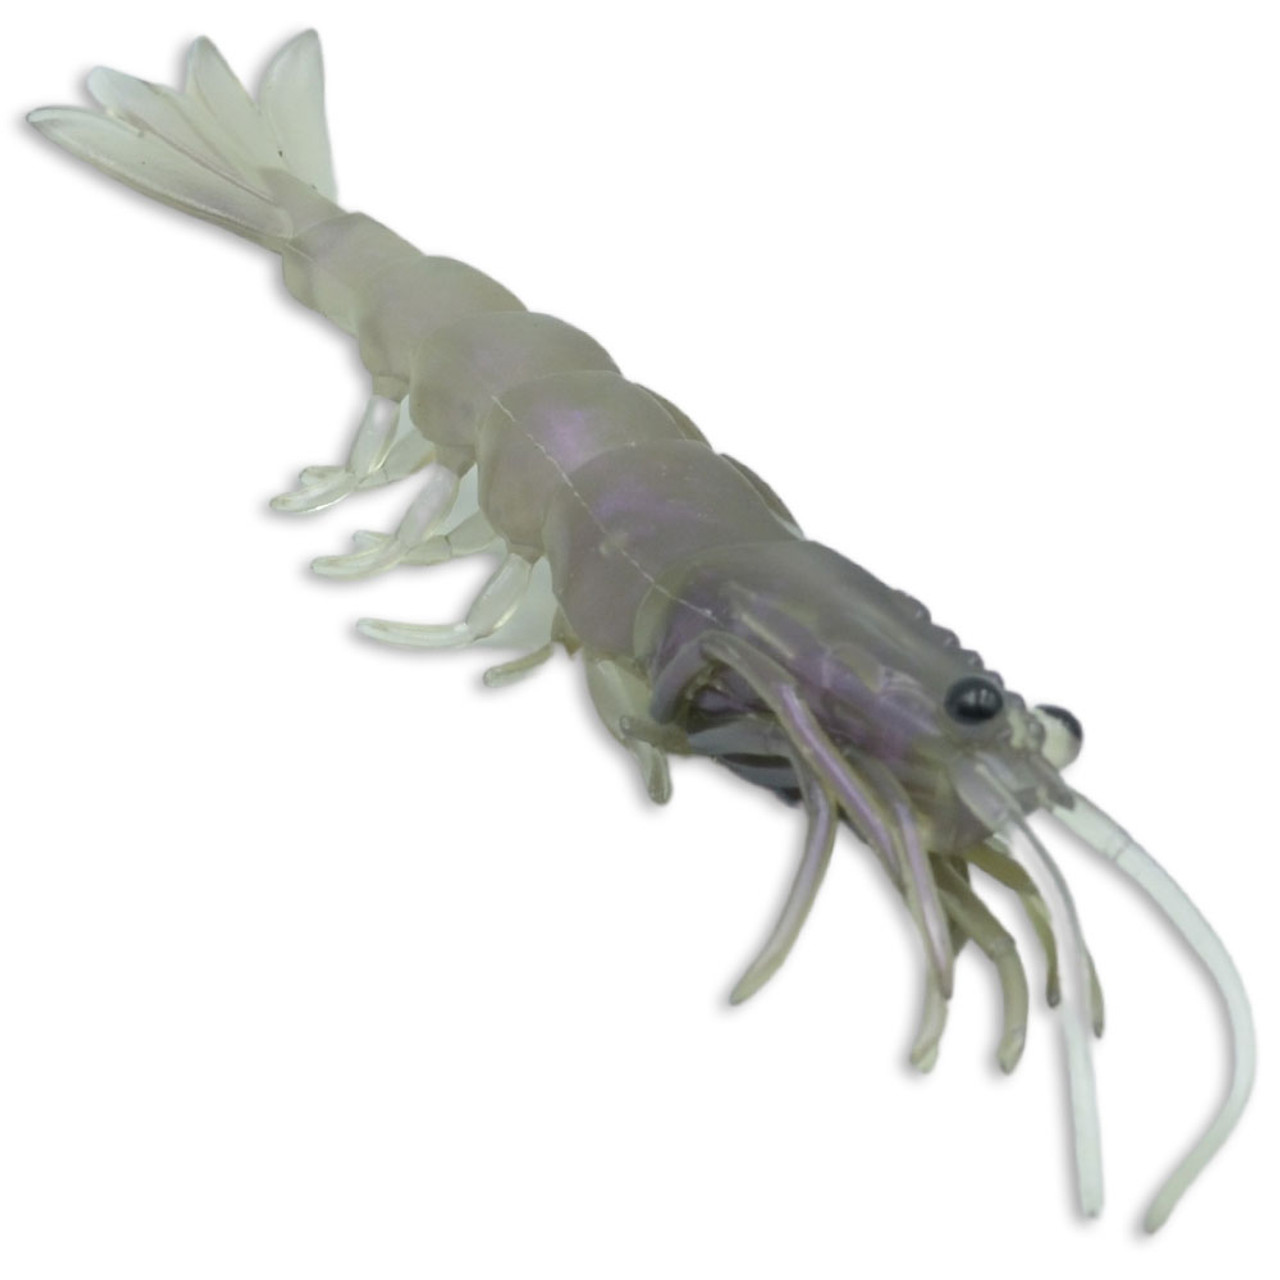 New PRO LURE CLONE PRAWN, THE ALL NEW PRO LURE CLONE PRAWNS HAVE ARRIVED  AT Ocean Storm Fishing Tackle Warilla